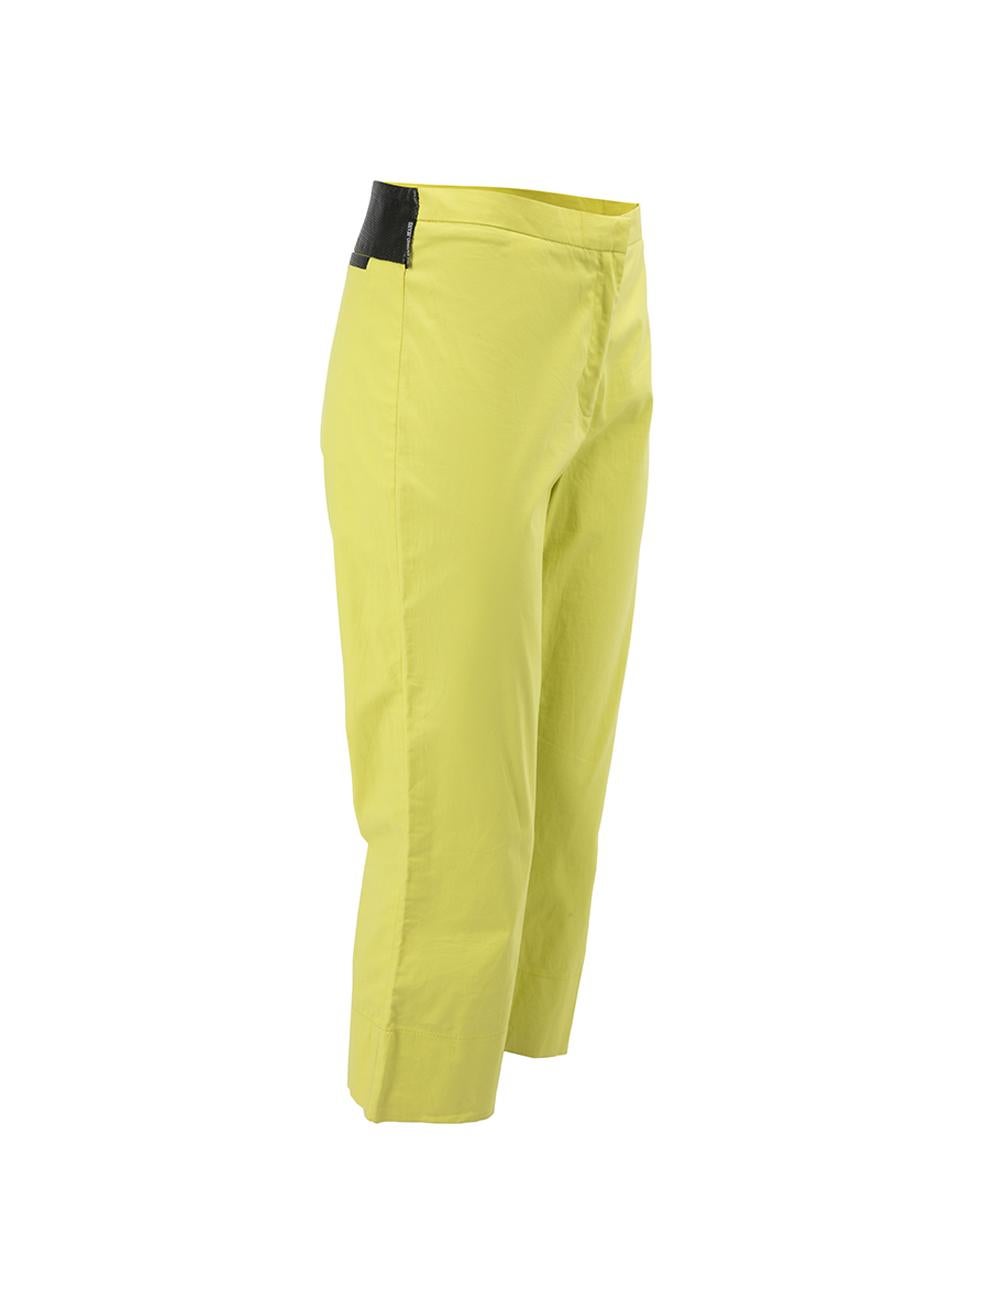 CONDITION is Good. Minor wear to trousers is evident. Light wear to lining with writing at centre back and faint linear mark to left leg on this used Valentino Jeans designer resale item.



Details


Lime green

Cotton

Flared trousers

Cropped